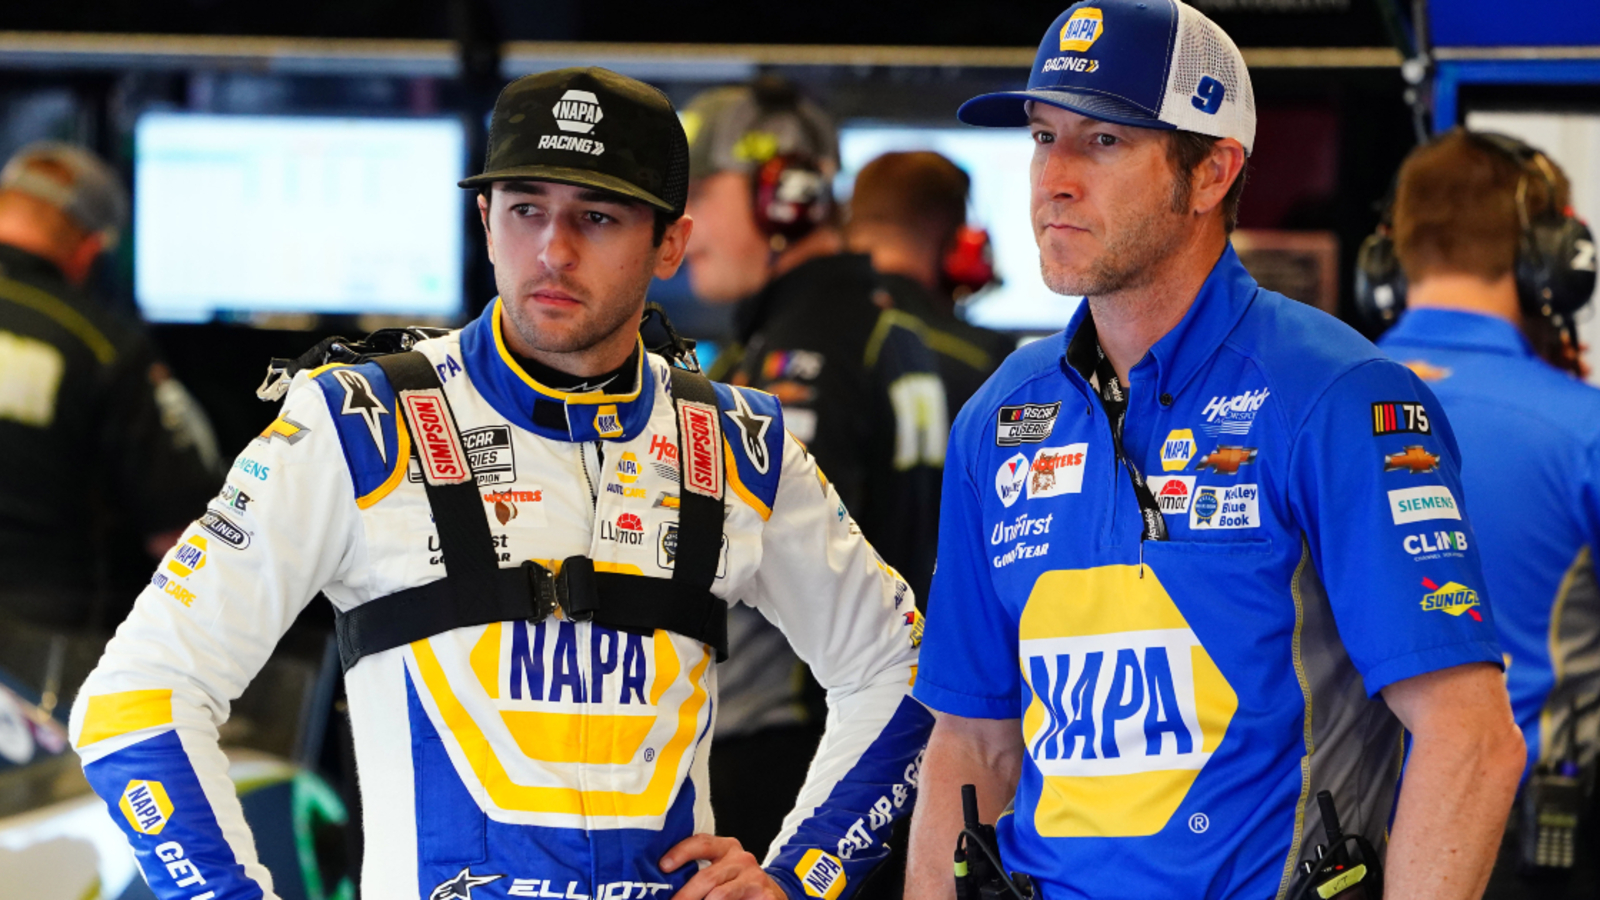 Chase Elliott fans calling for crew chief Alan Gustafson to be fired after fuel shortage at Watkins Glen